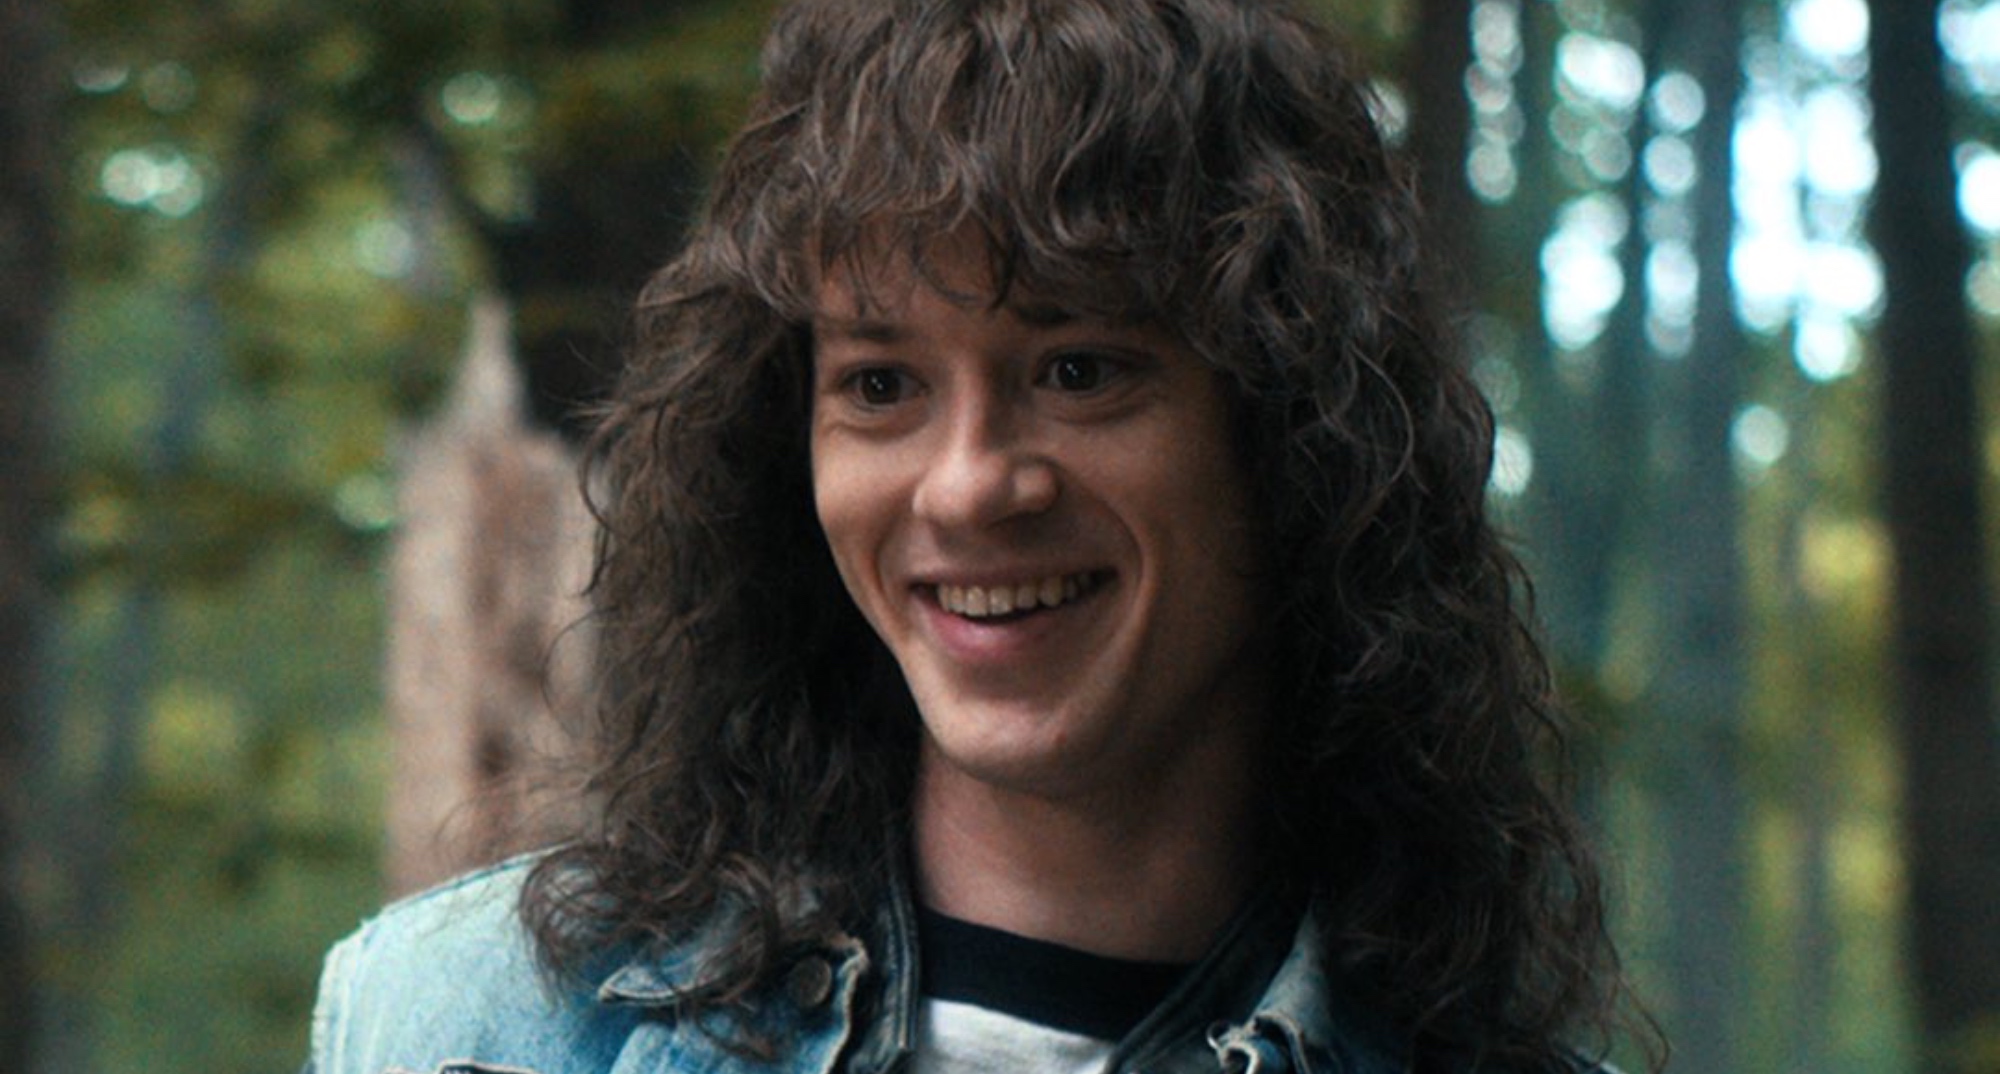 The Stranger Things character who was meant to die in season 4